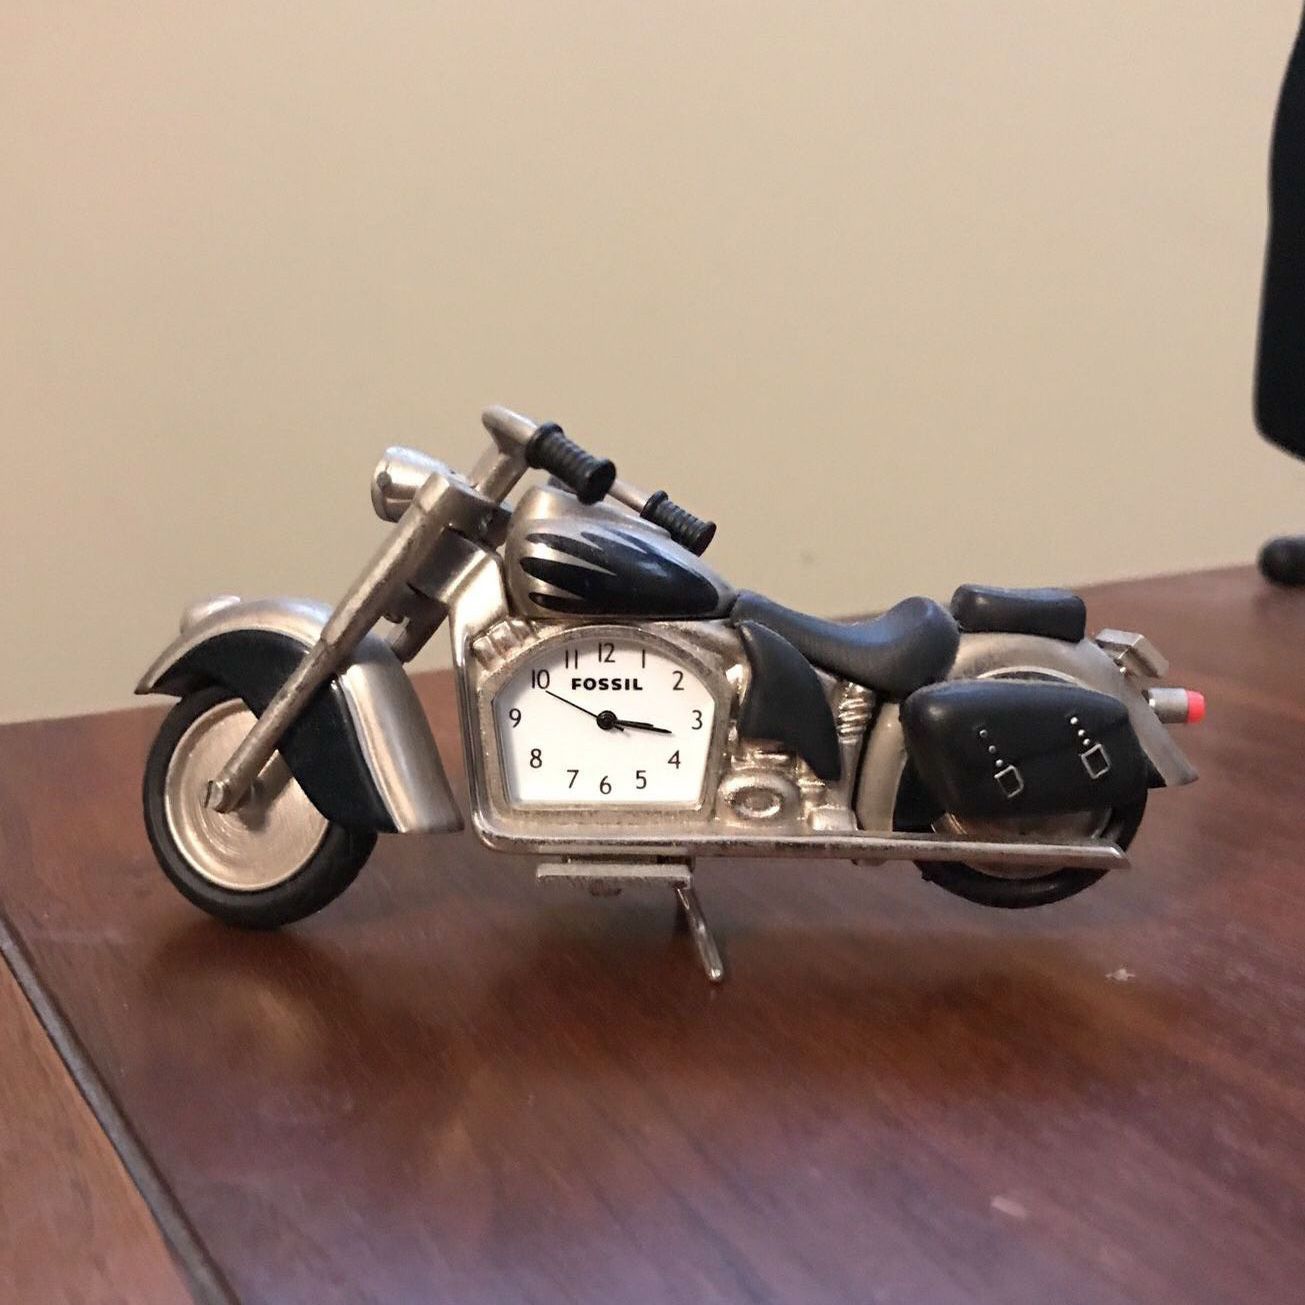 Fossil Watch Clock Motorcycle cruiser